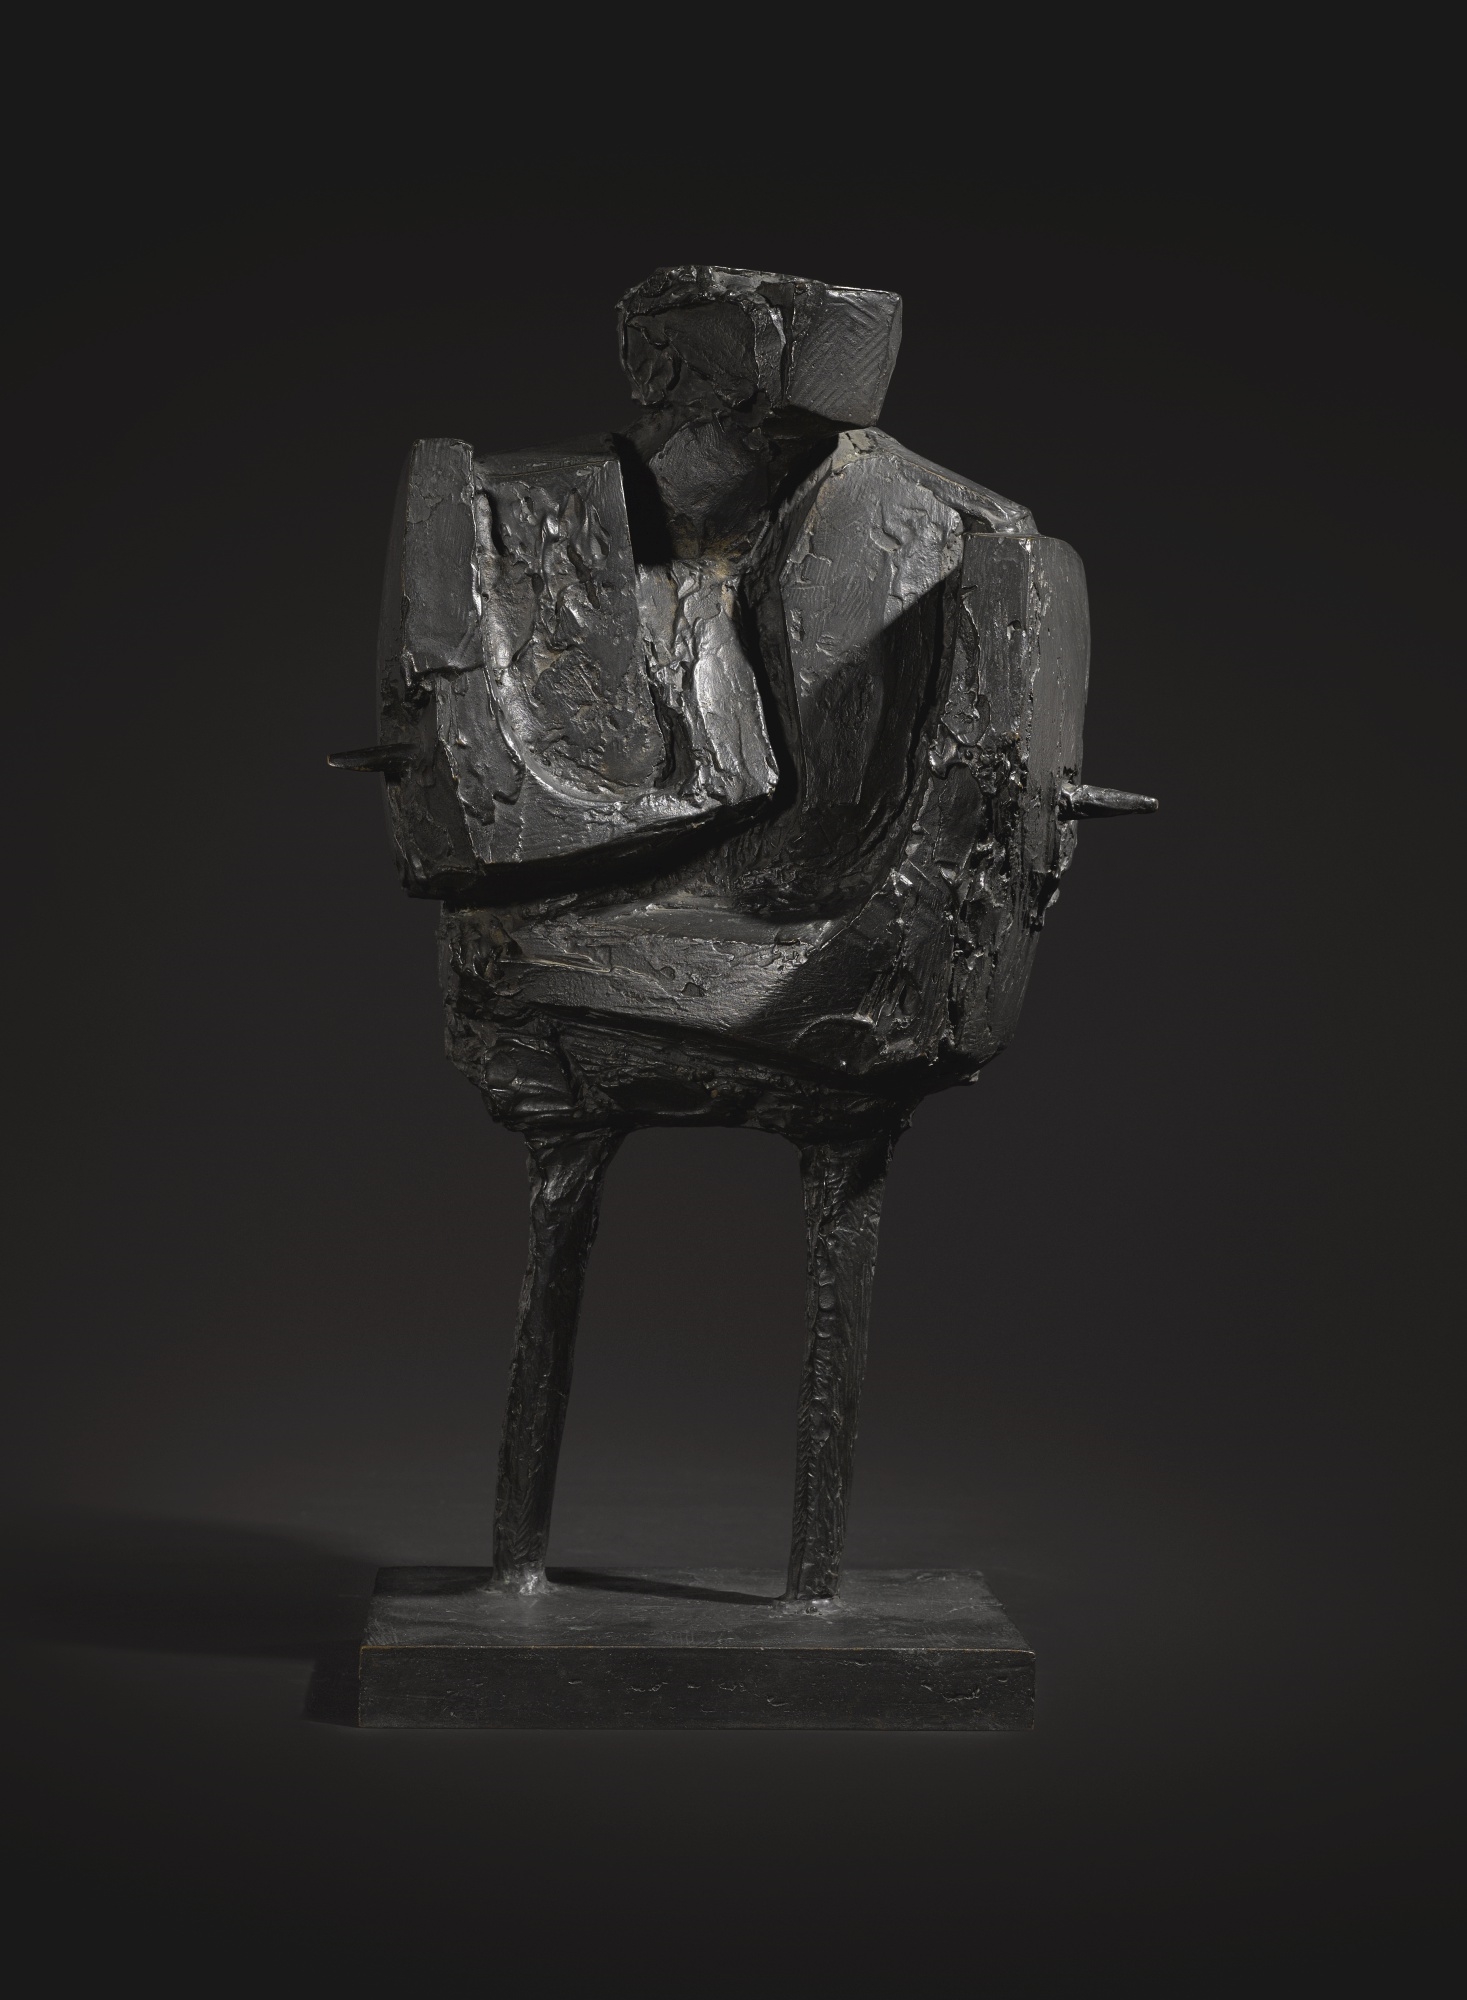 MAQUETTE FOR LARGE STANDING FIGURE by Bernard Meadows, 1962